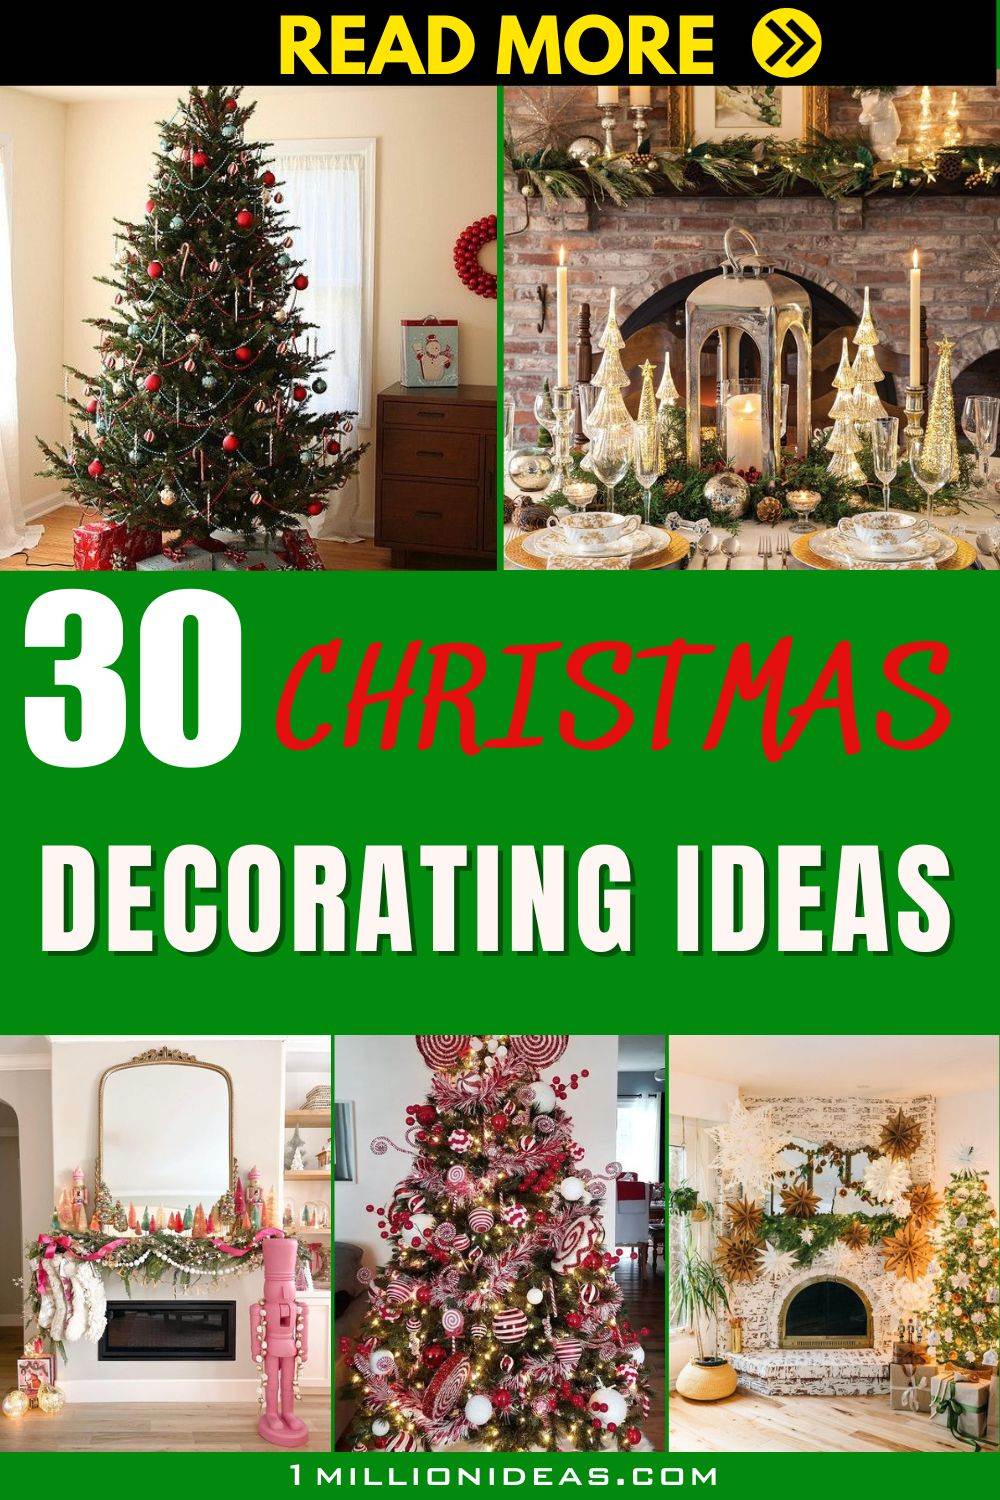 30 Stunning Christmas Decorating Ideas To Get Your Home Ready For The Festival - 191